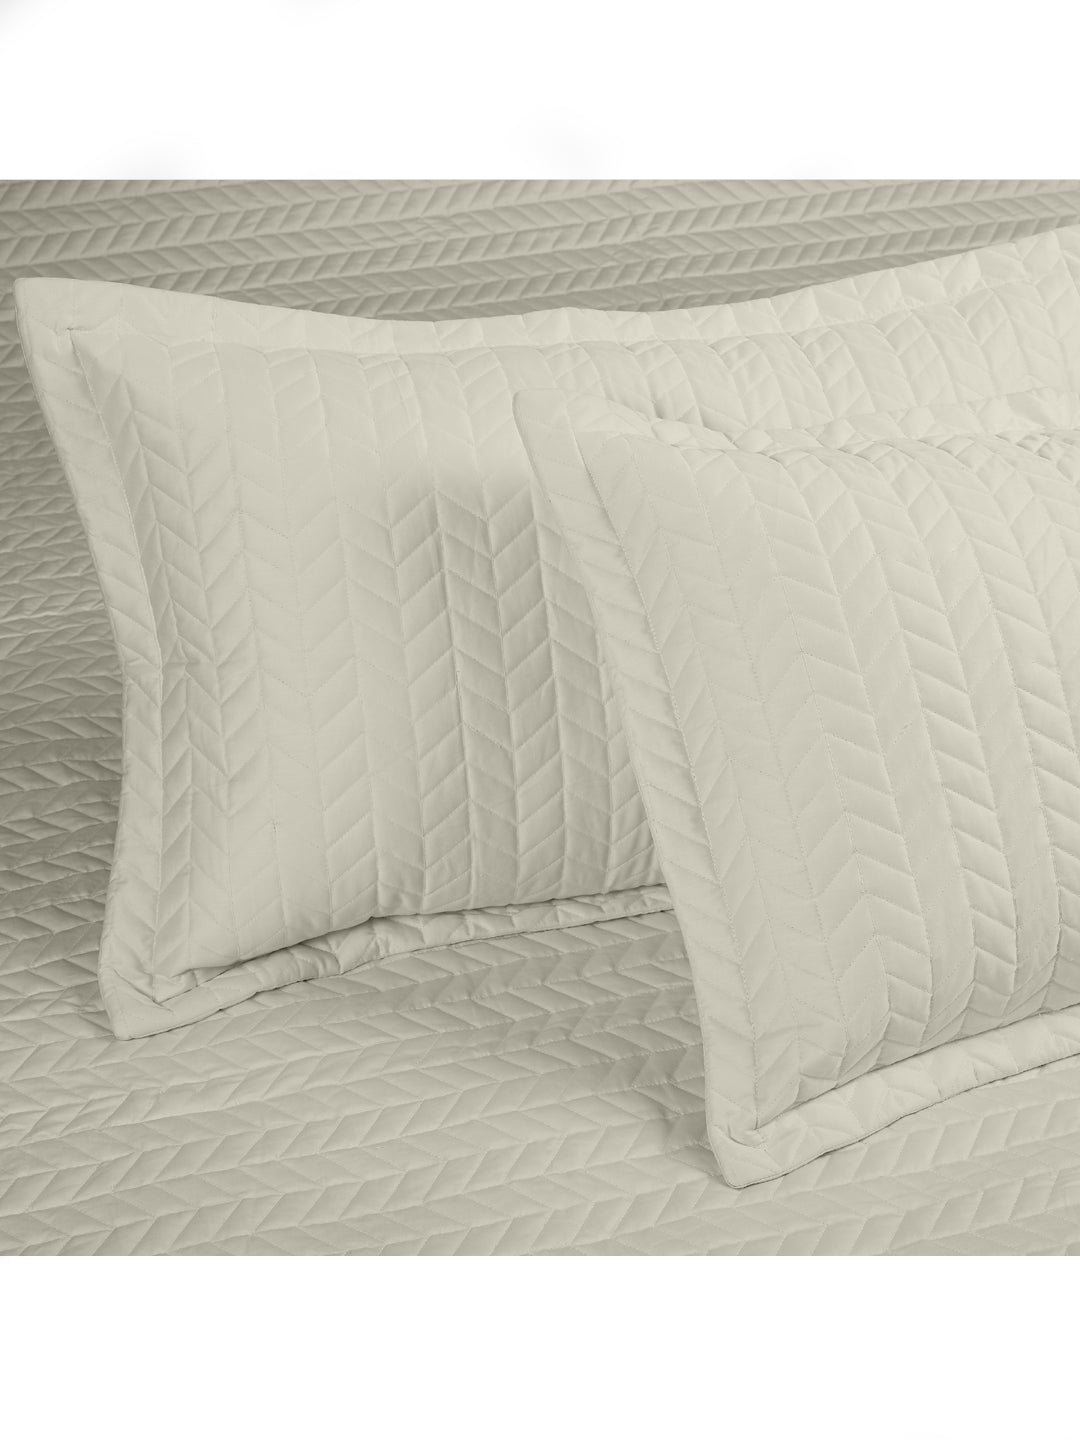 MARK HOME Quilted Bed Cover Ivory made from 100% Organic Cotton Sateen Fabric 400 TC with 150 GSM Wading between the fabric